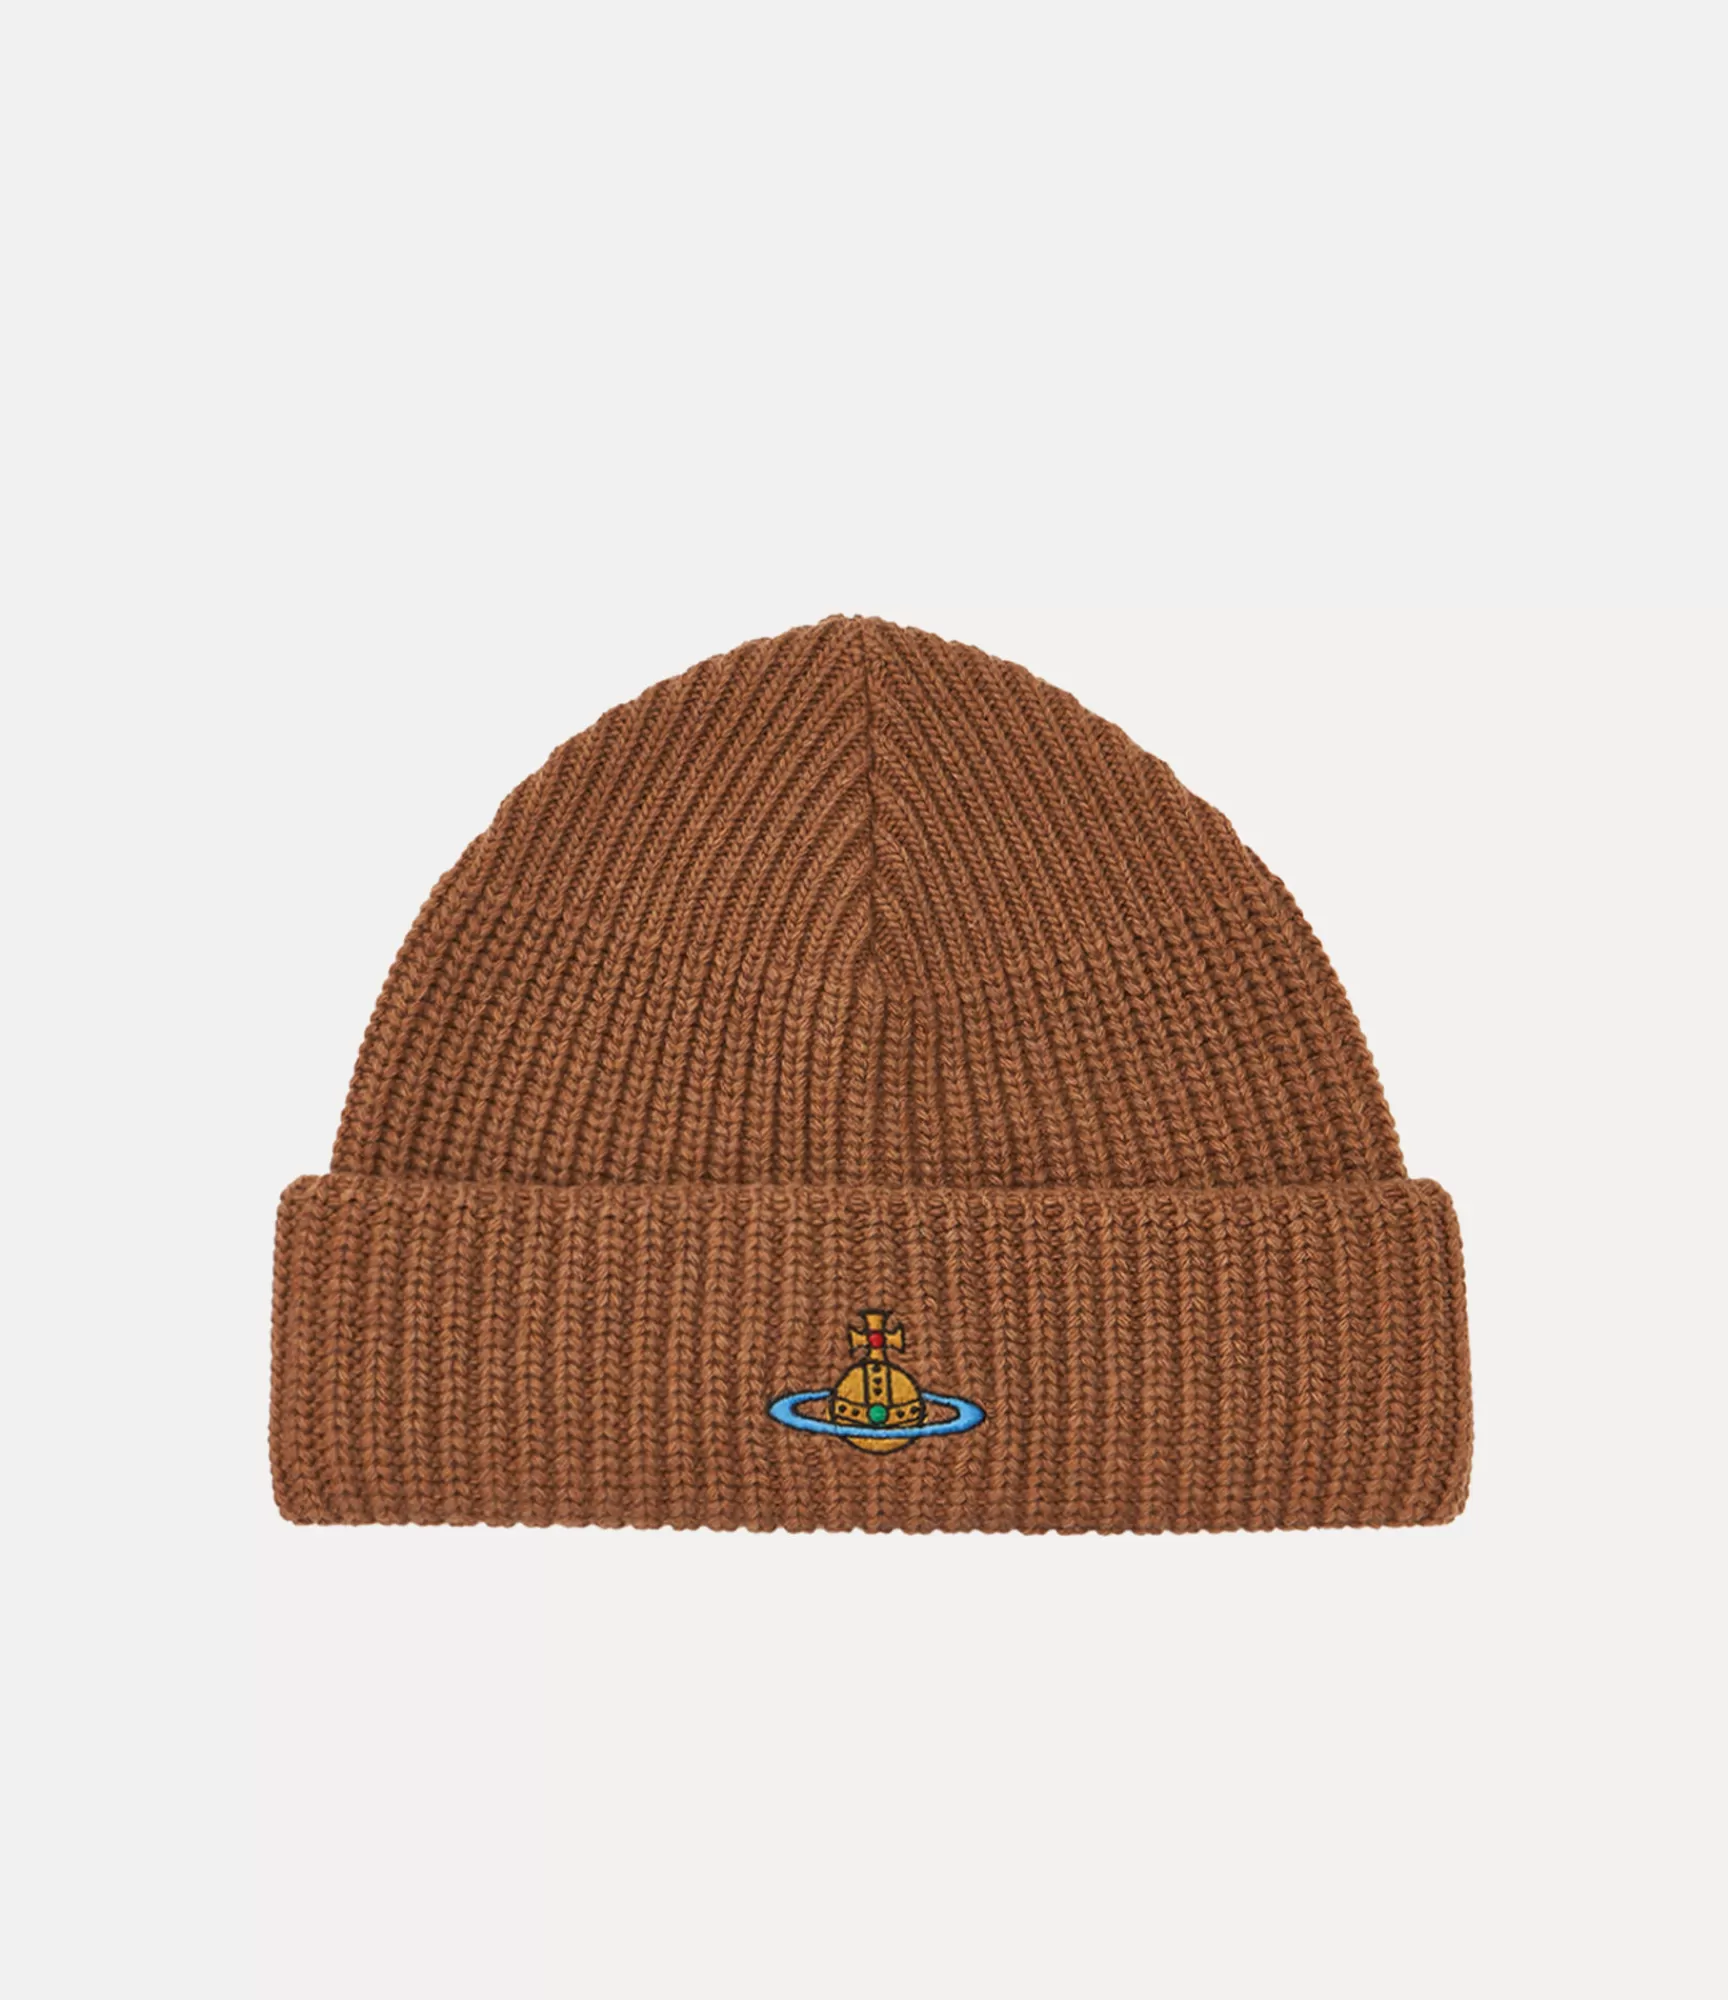 Vivienne Westwood Other Accessories*Sporty beanie Camel